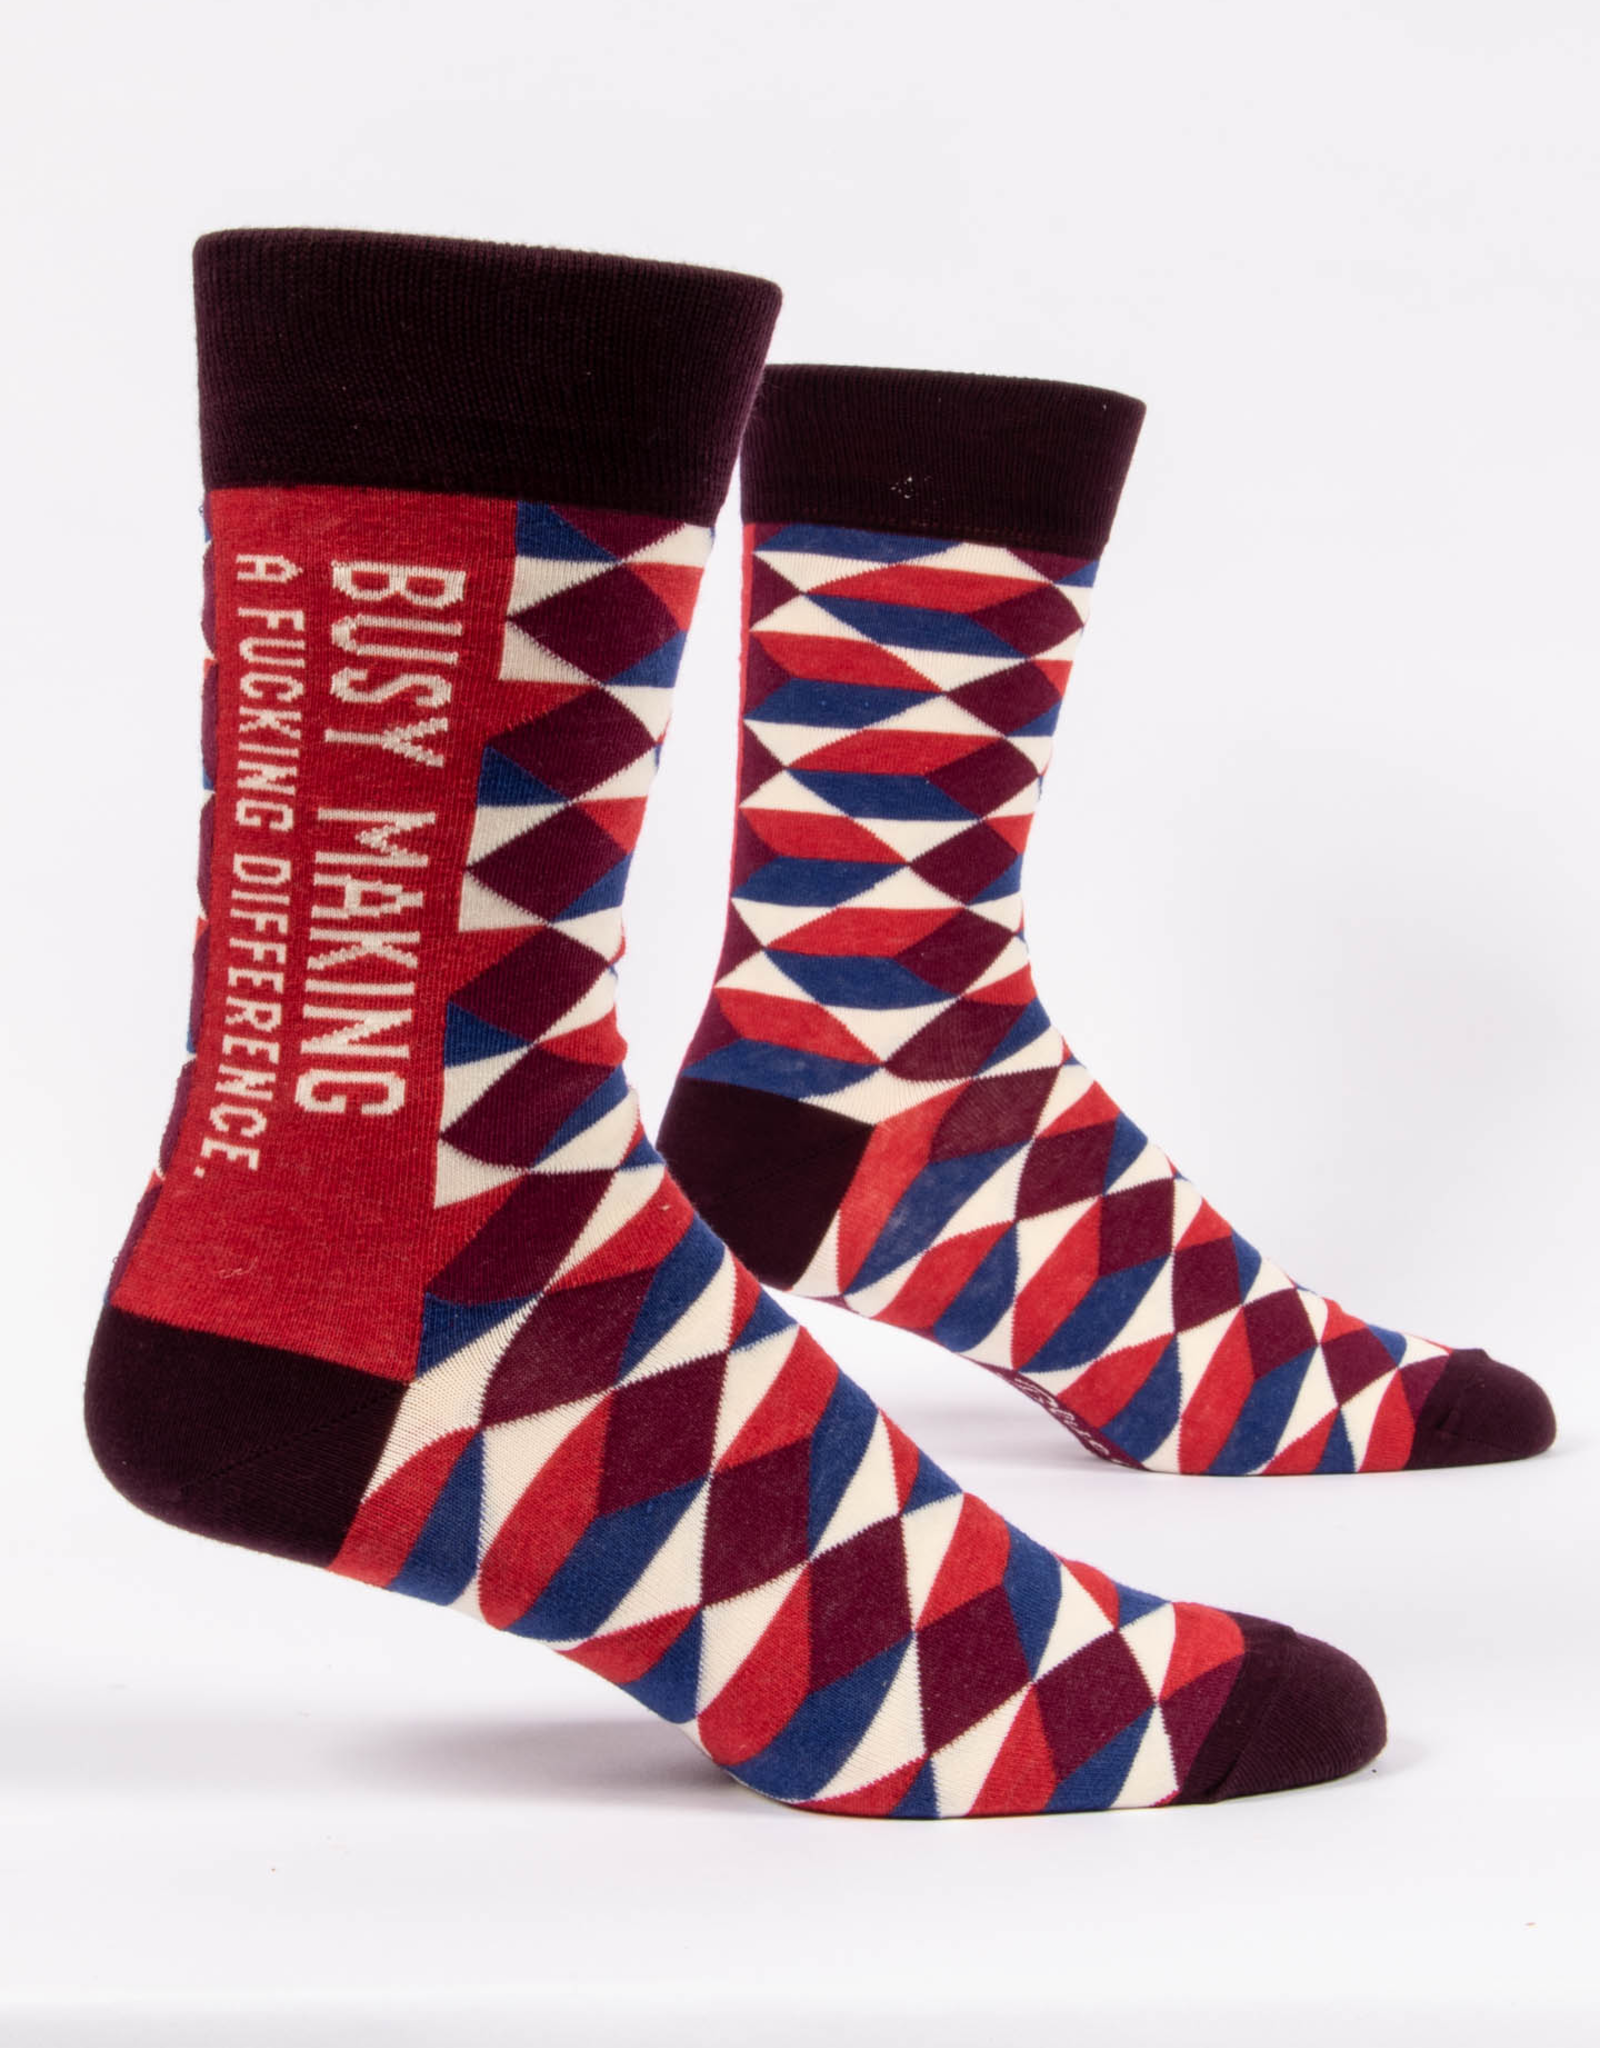 Blue Q Socks - Men's Crew: Busy Making a Difference